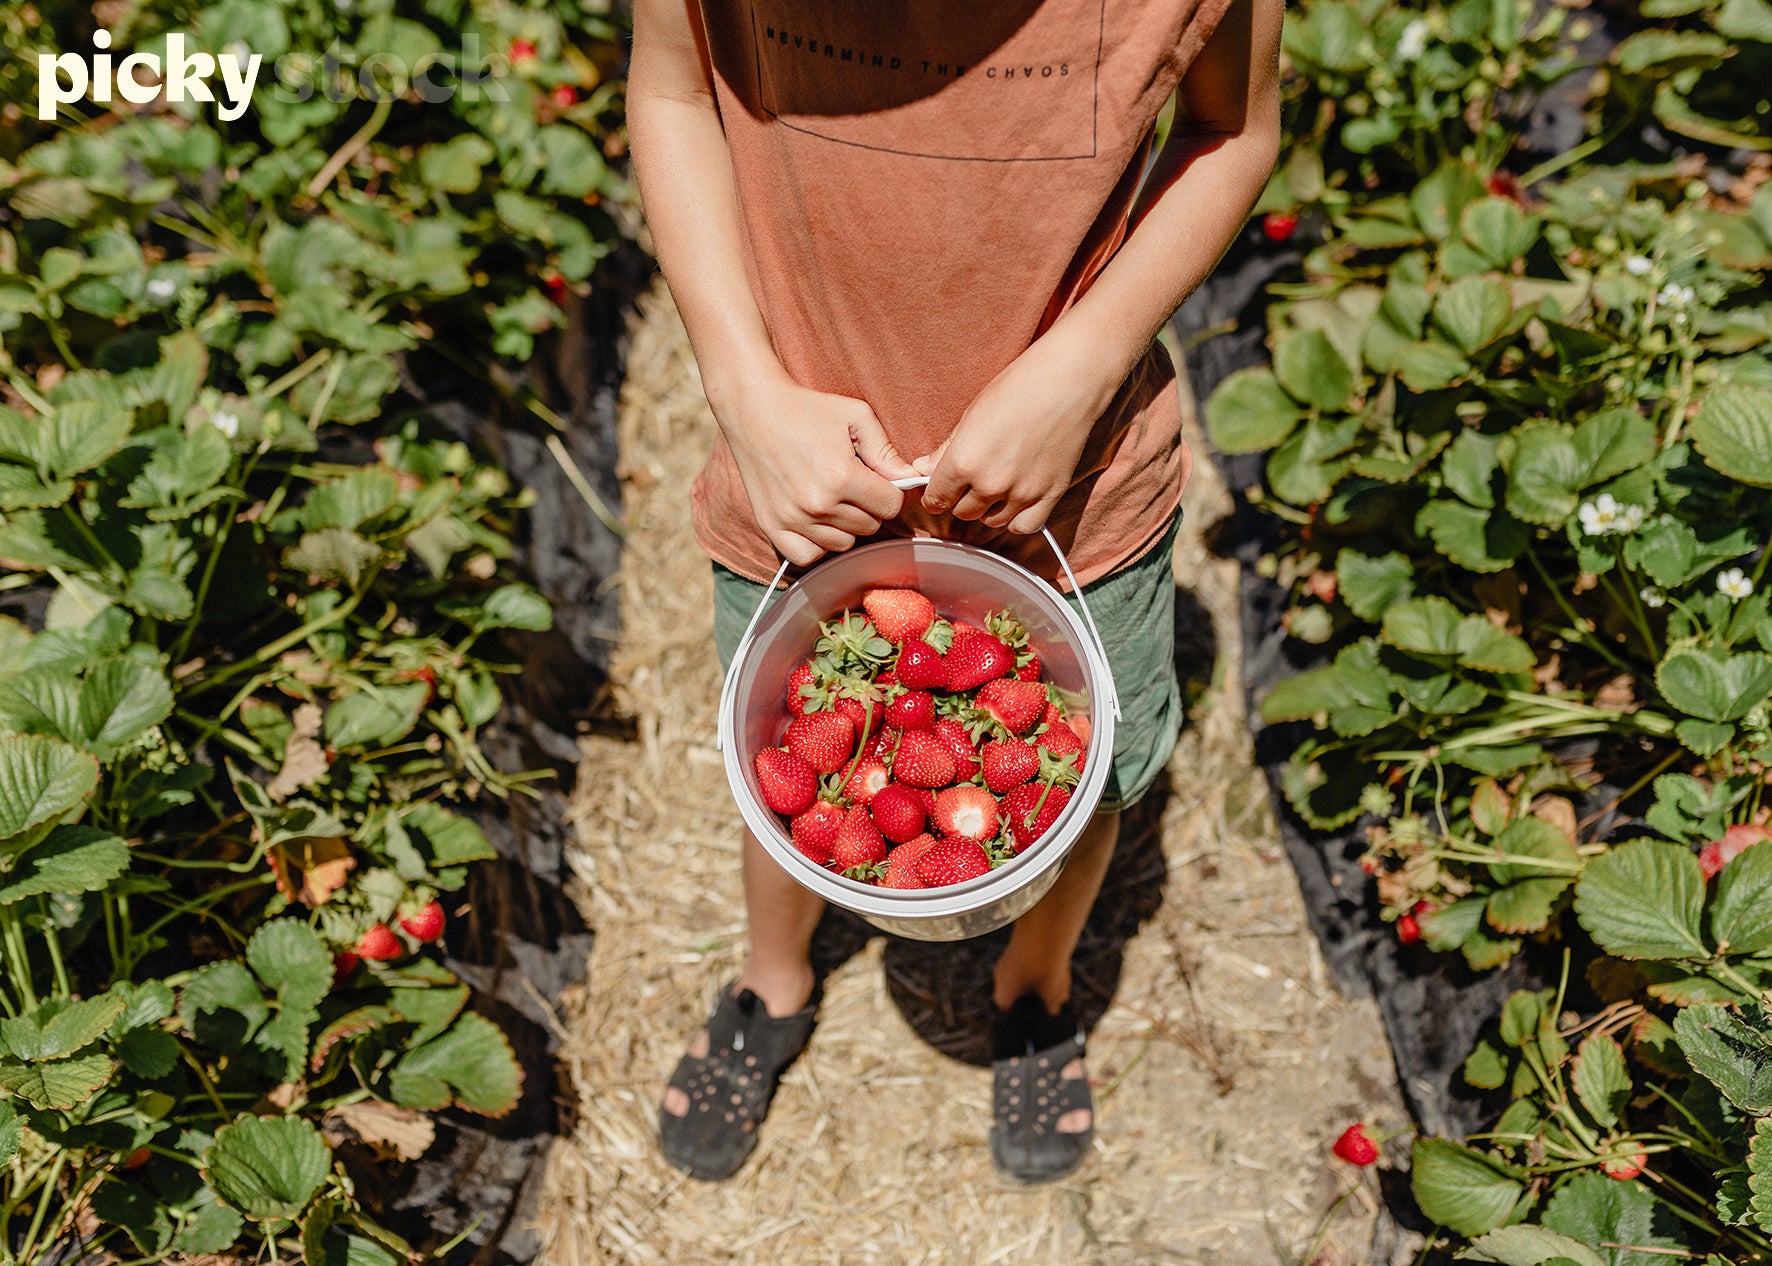 Young boy wearing orange singlet holding a large white bucket of strawberries. Standing along a strawberry orchard row. High angle, strawberries visible on green plants